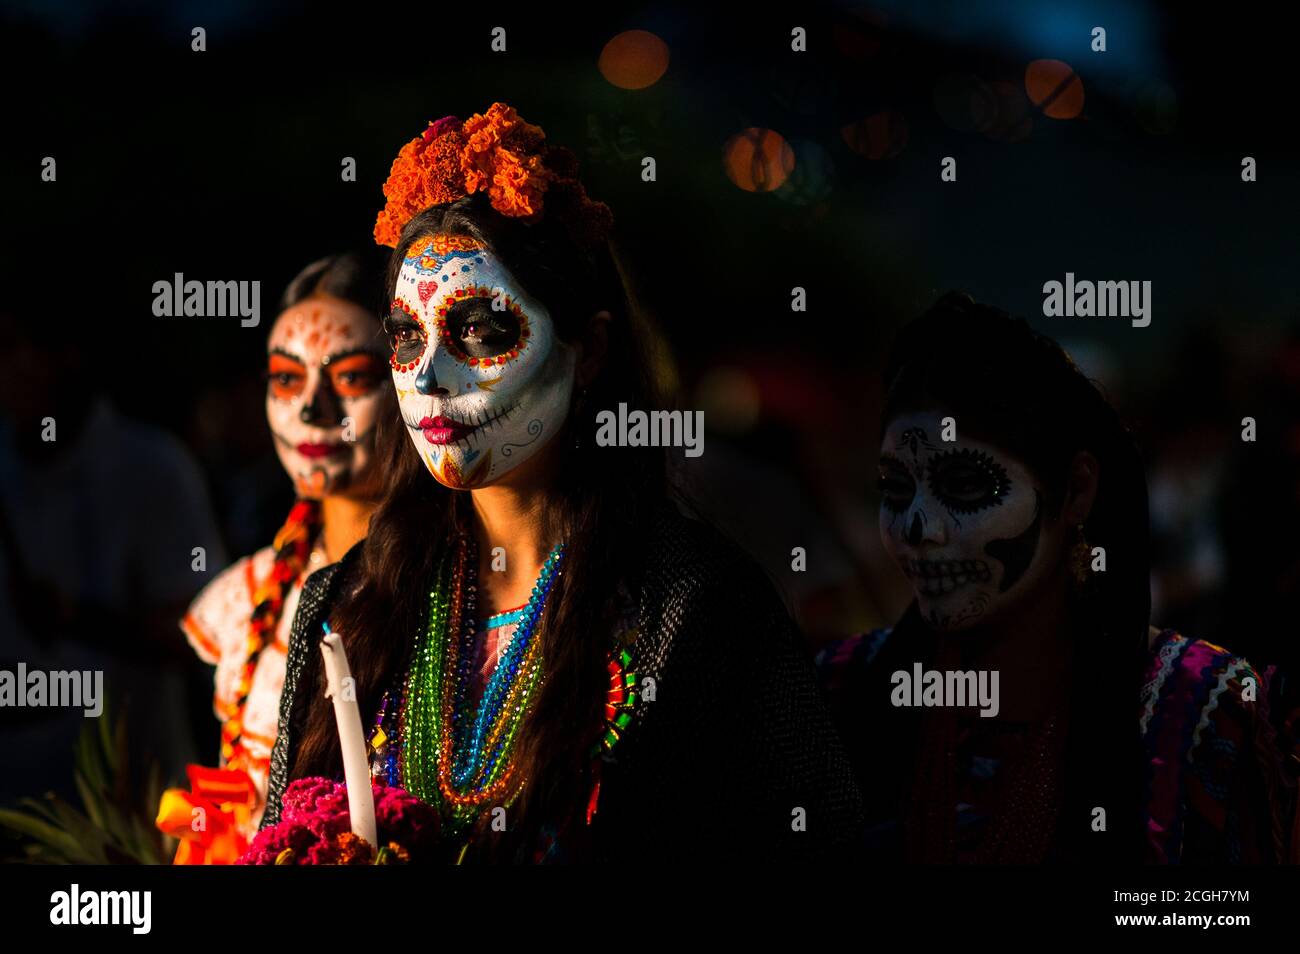 Young Mexican women, dressed as La Catrina, take part in the Day of the Dead parade in Oaxaca, Mexico. Stock Photo